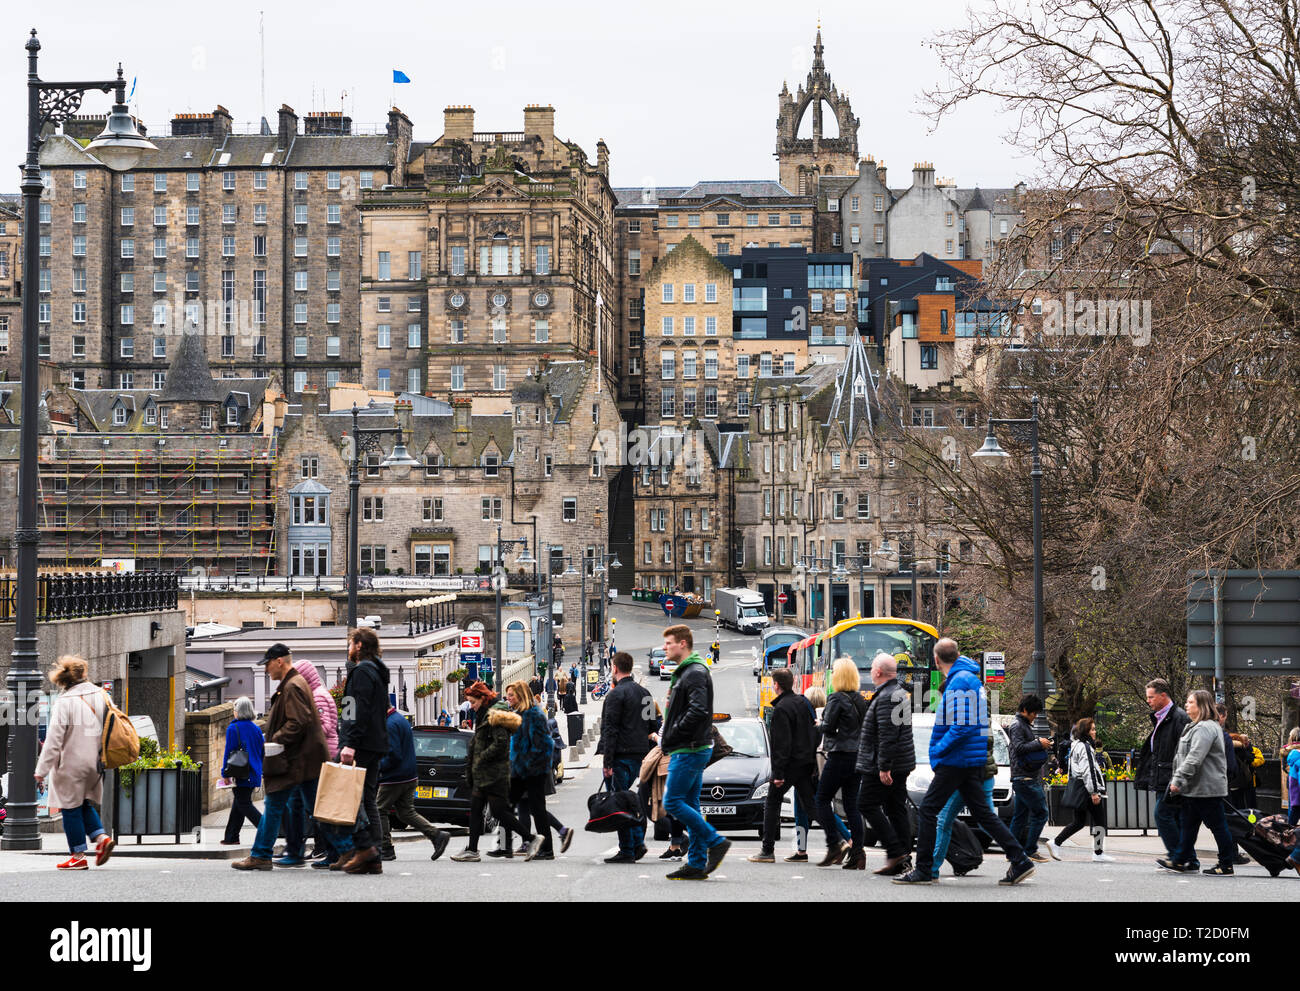 Pedestrians crossing street with Old Town to rear in central Edinburgh, Scotland, UK Stock Photo